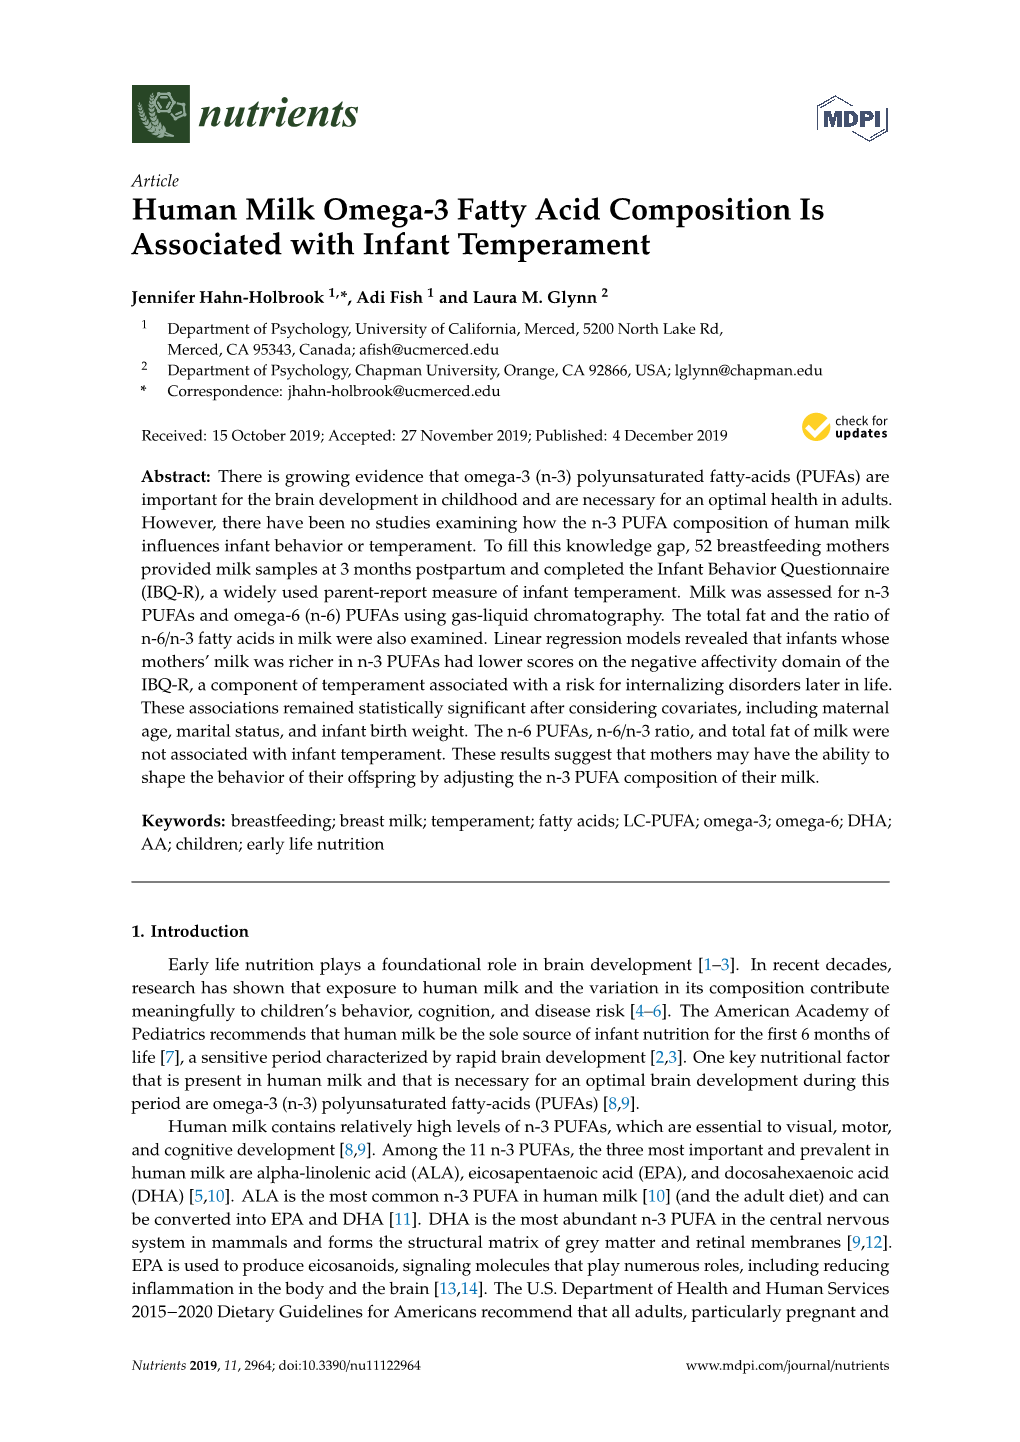 Human Milk Omega-3 Fatty Acid Composition Is Associated with Infant Temperament